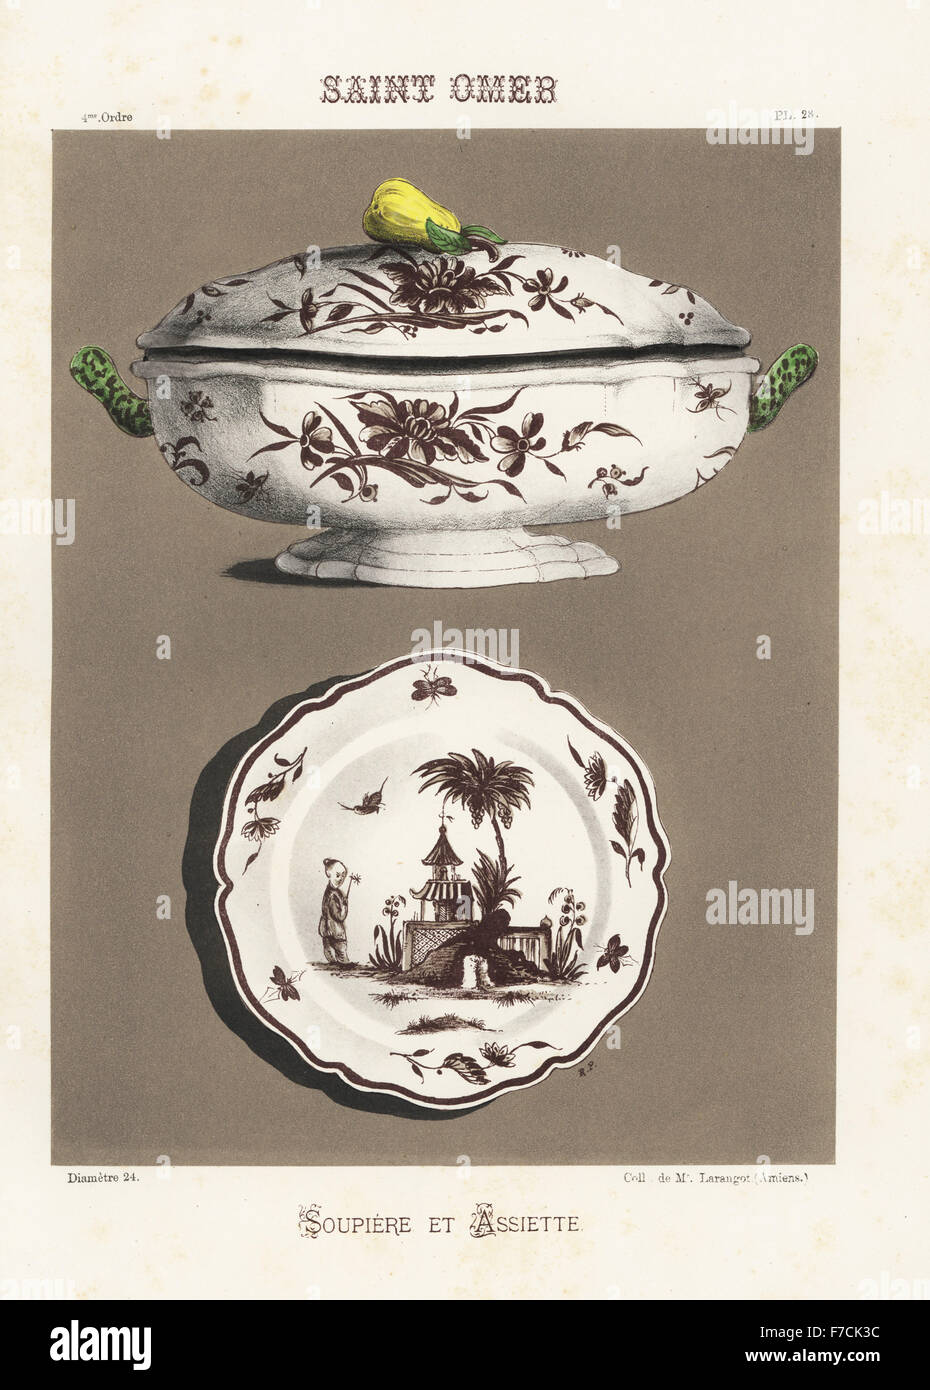 Soup dish and plate from Saint Omer, France. Decorated with Chinese landscape scene, insects, birds. Hand-finished chromolithograph by Ris Paquot from his General History of Ancient French and Foreign Glazed Pottery, Chez l'Auteur, Paris, 1874. Stock Photo